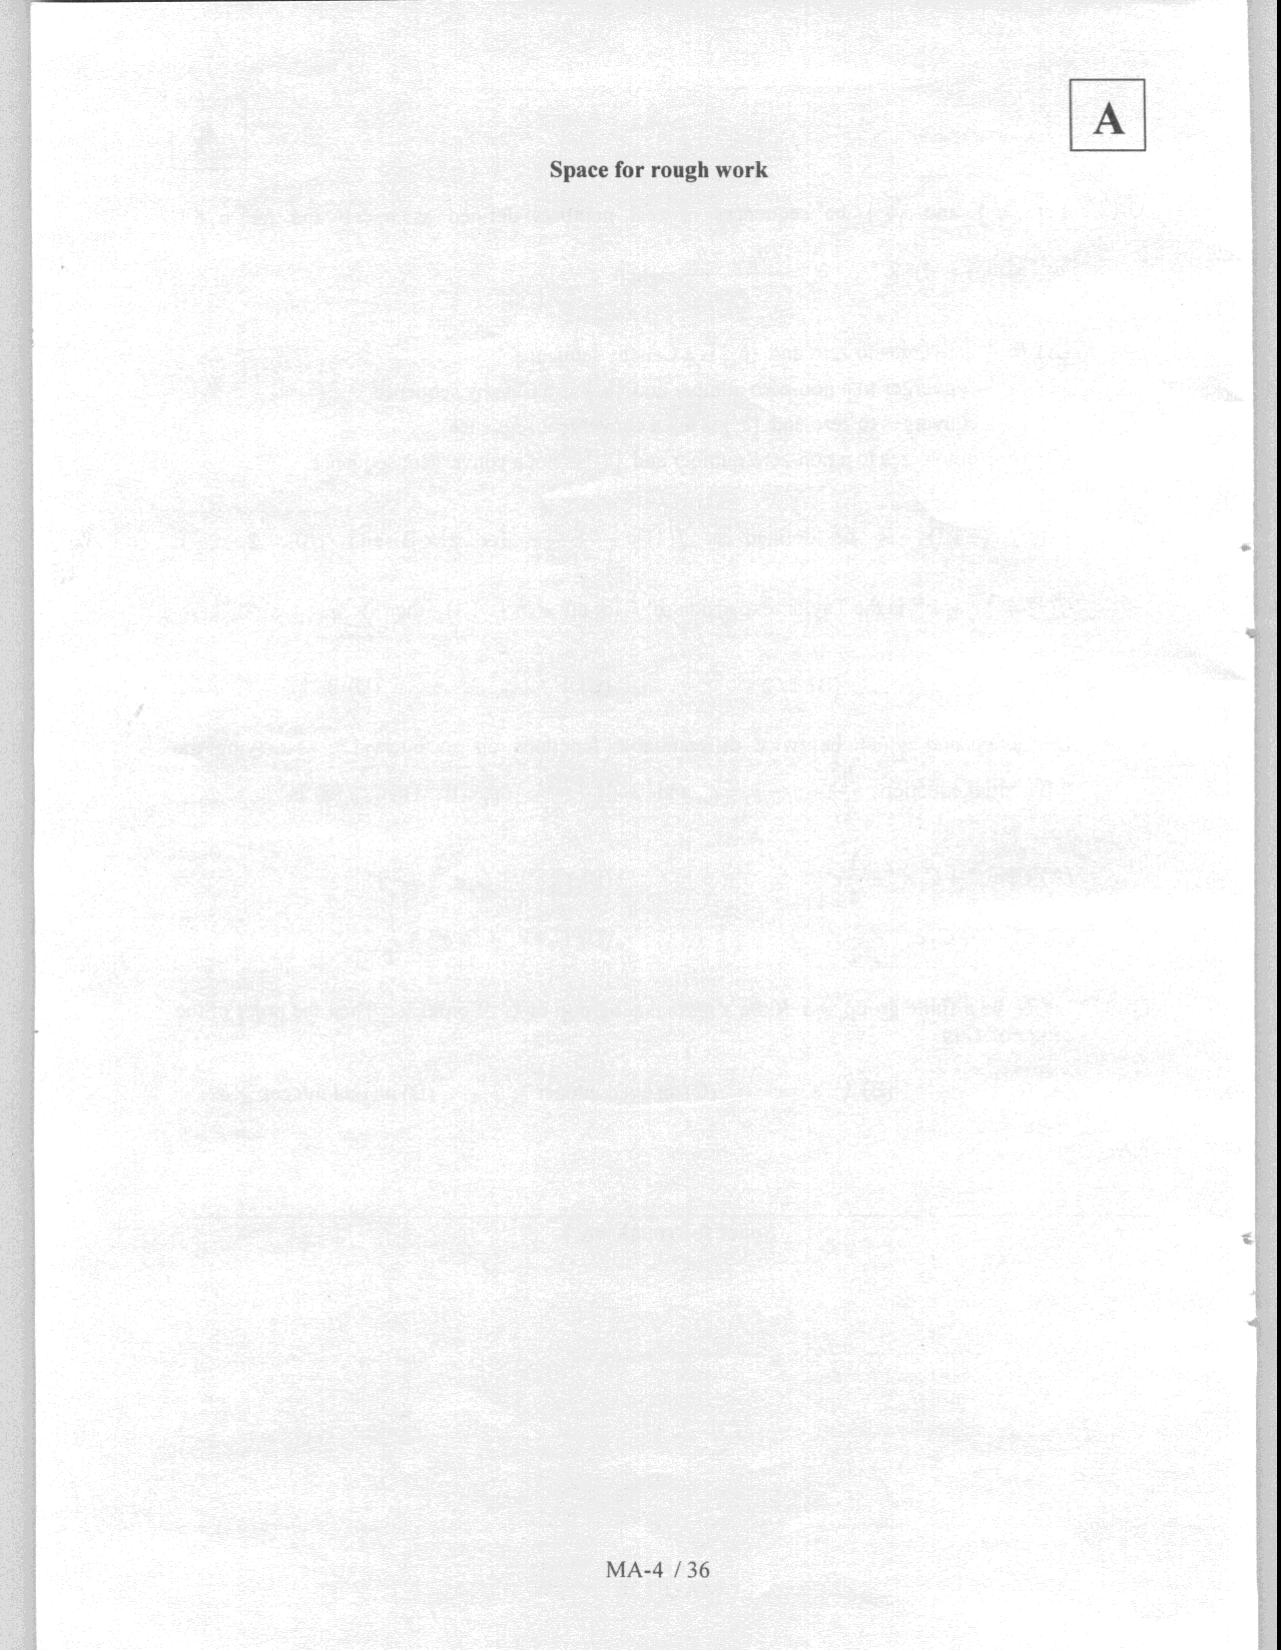 JAM 2008: MA Question Paper - Page 6